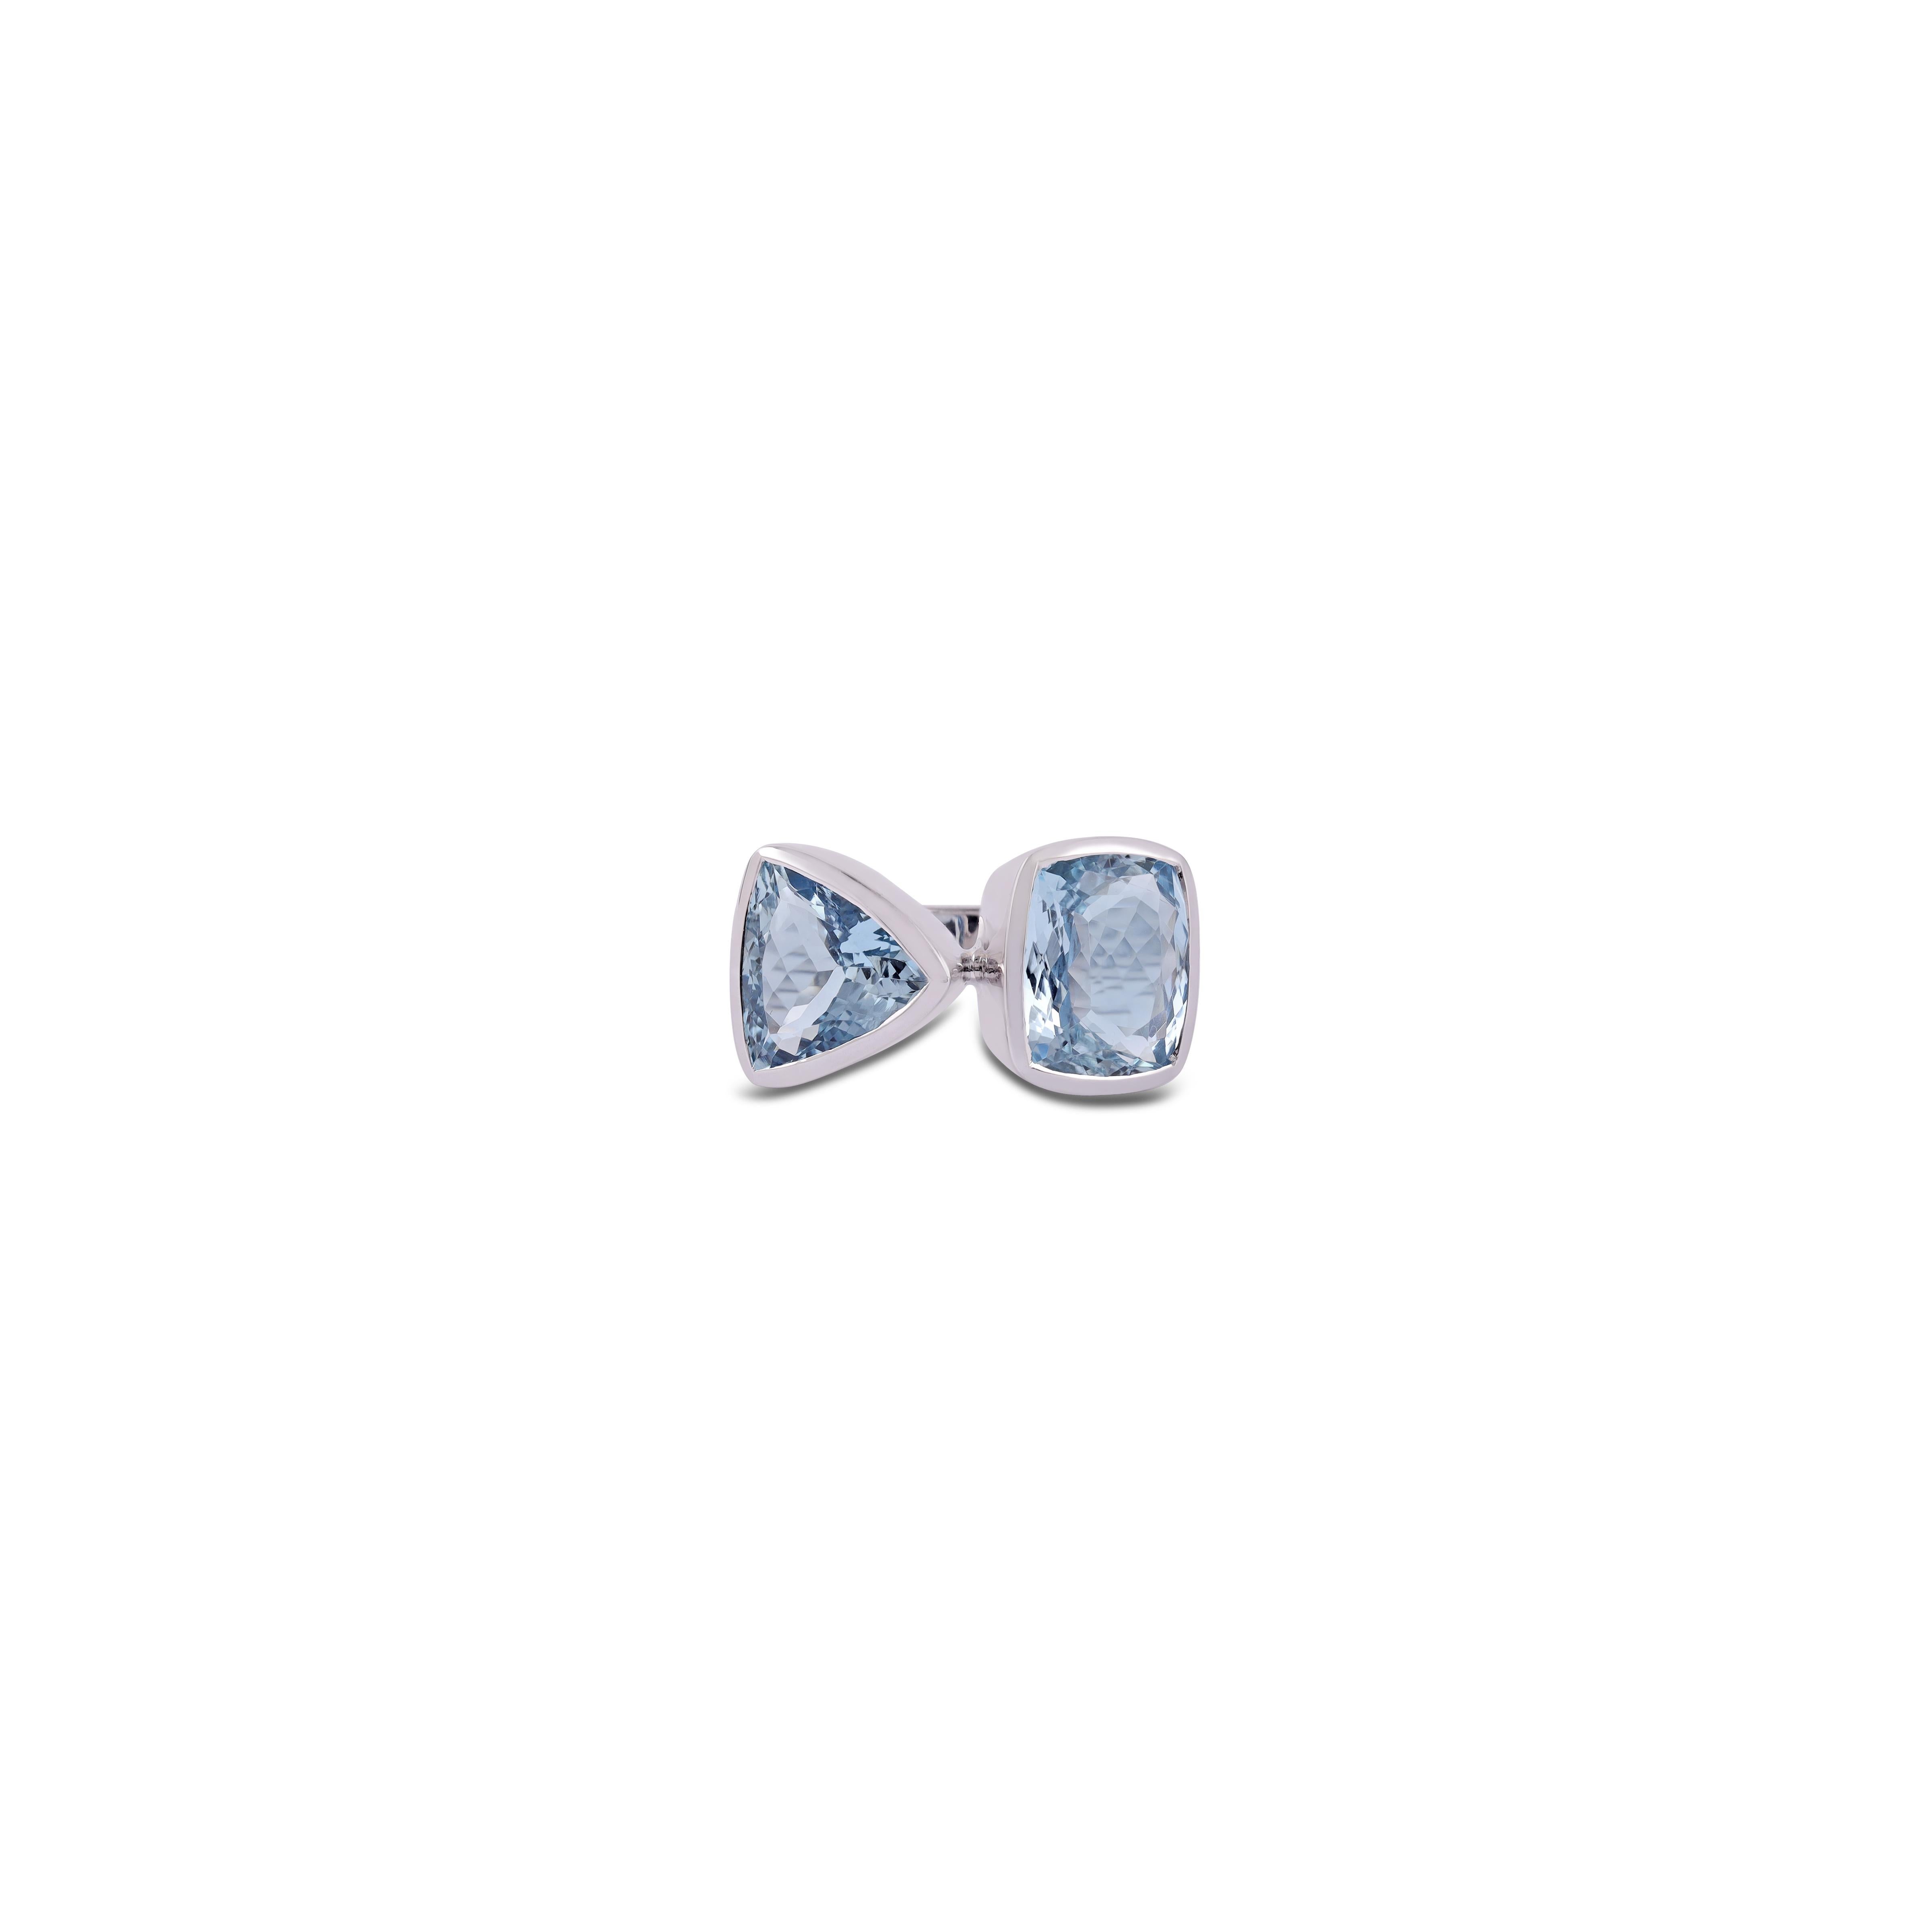 6.69 Carat Aquamarine Stud Earrings in 18 Karat White Gold


Elegant Aquamarine stud earrings that are fun to wear. A classic pair of earrings with a designer touch with its setting in 18K Rose gold, giving it a true Fun look.



Aquamarine : 6.69